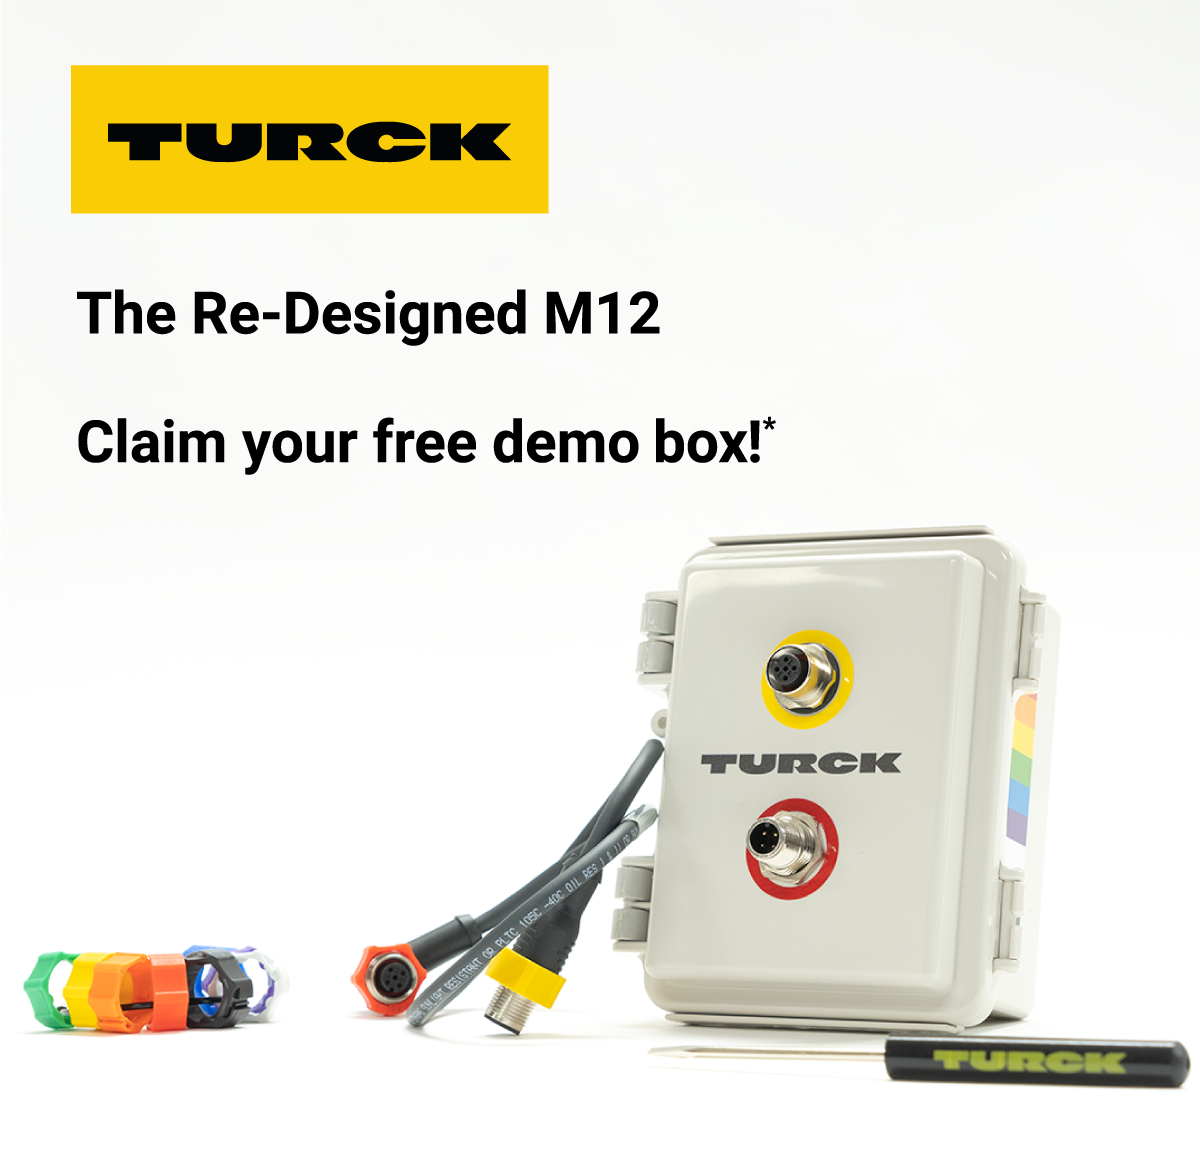 Claim your free demo box of the redesigned M12 from Turck